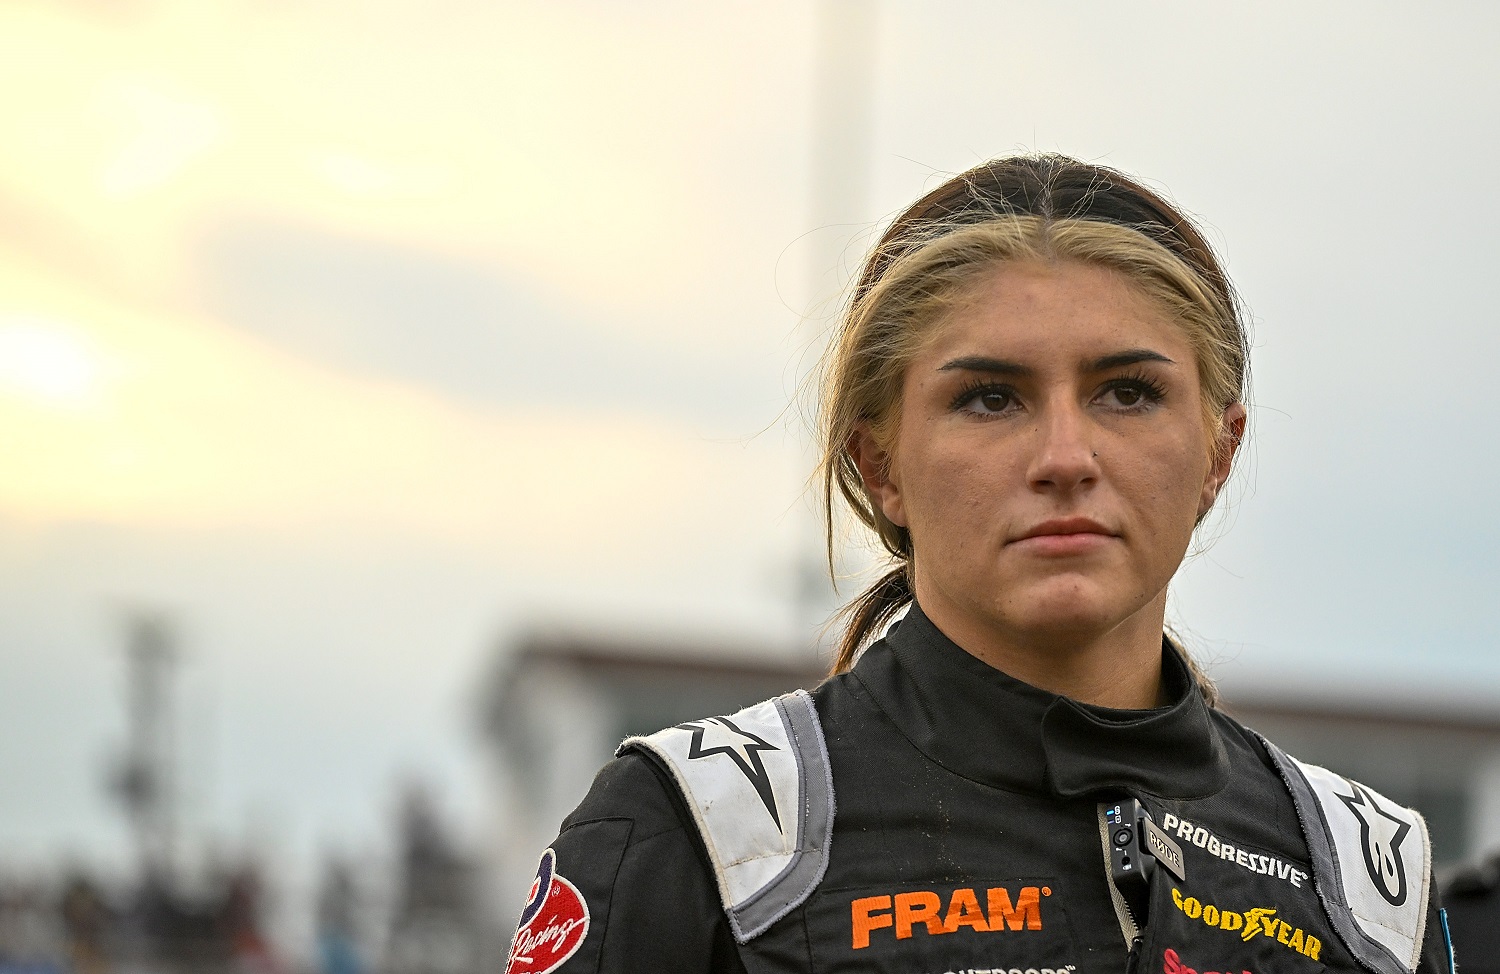 Hailie Deegan looks on during a heat race at a Camping World Superstar Racing Experience at I-55 Raceway on July 16, 2022.